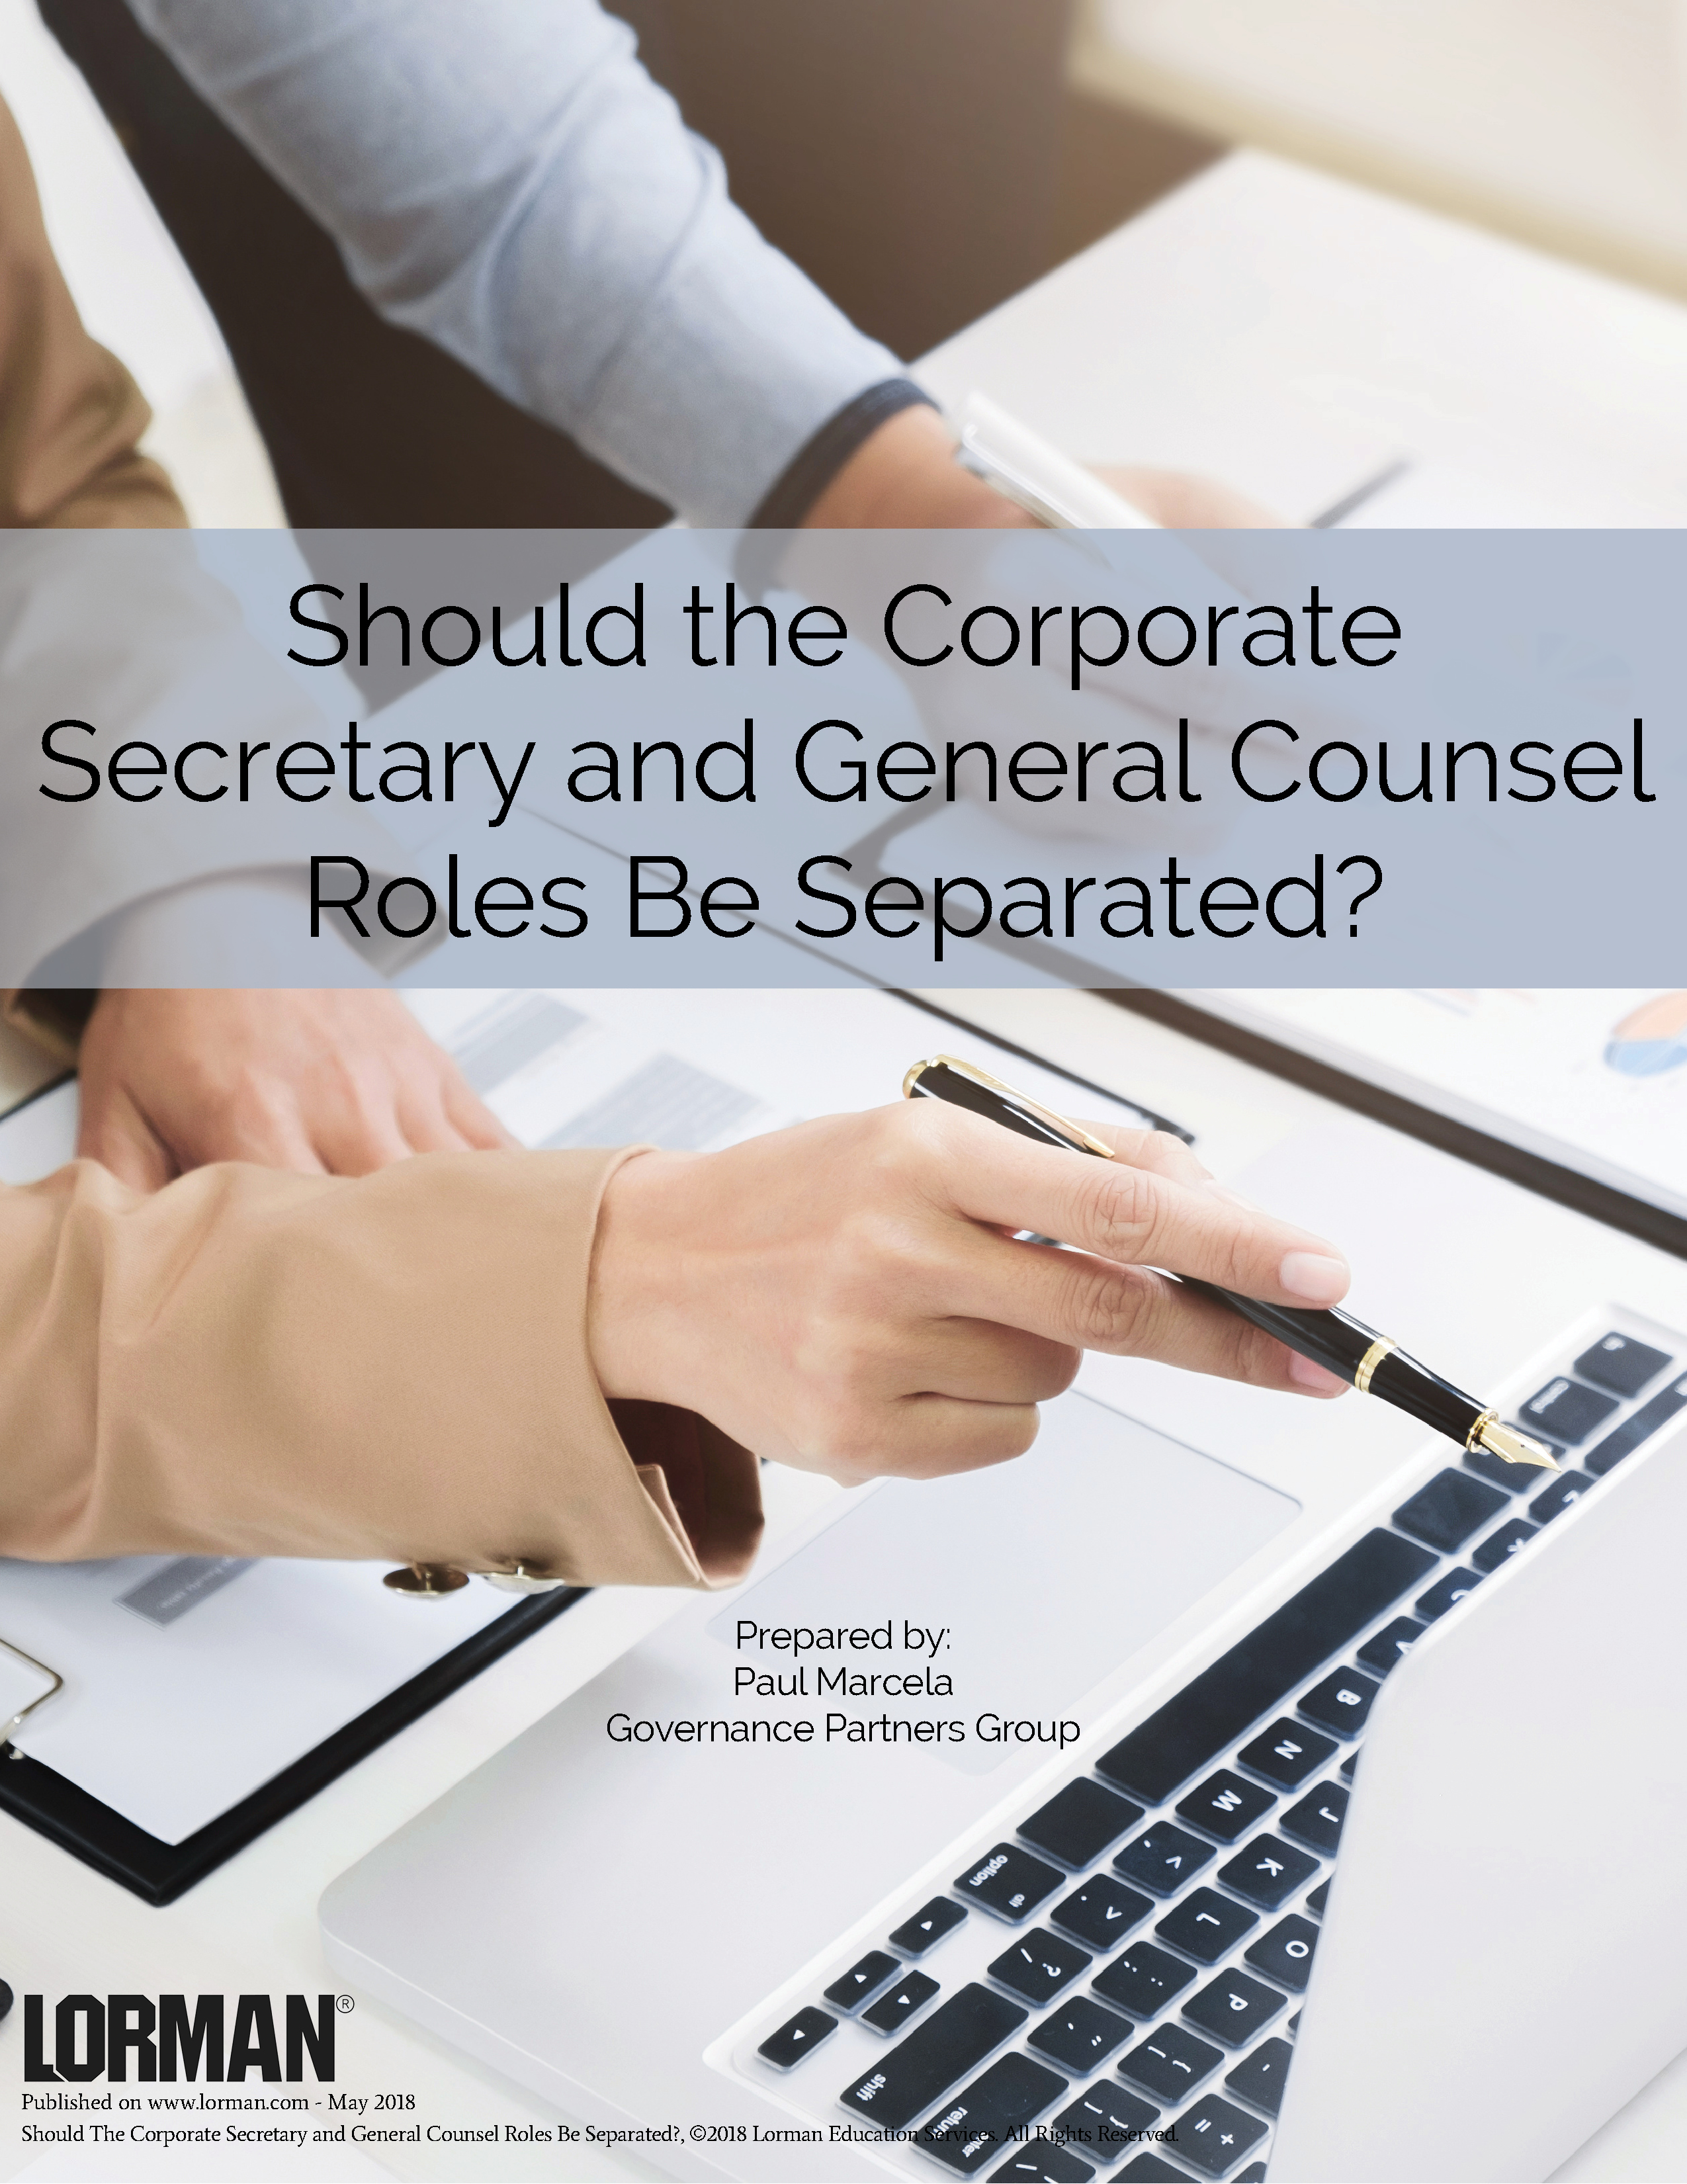 Should the Corporate Secretary and General Counsel Roles Be Separated?